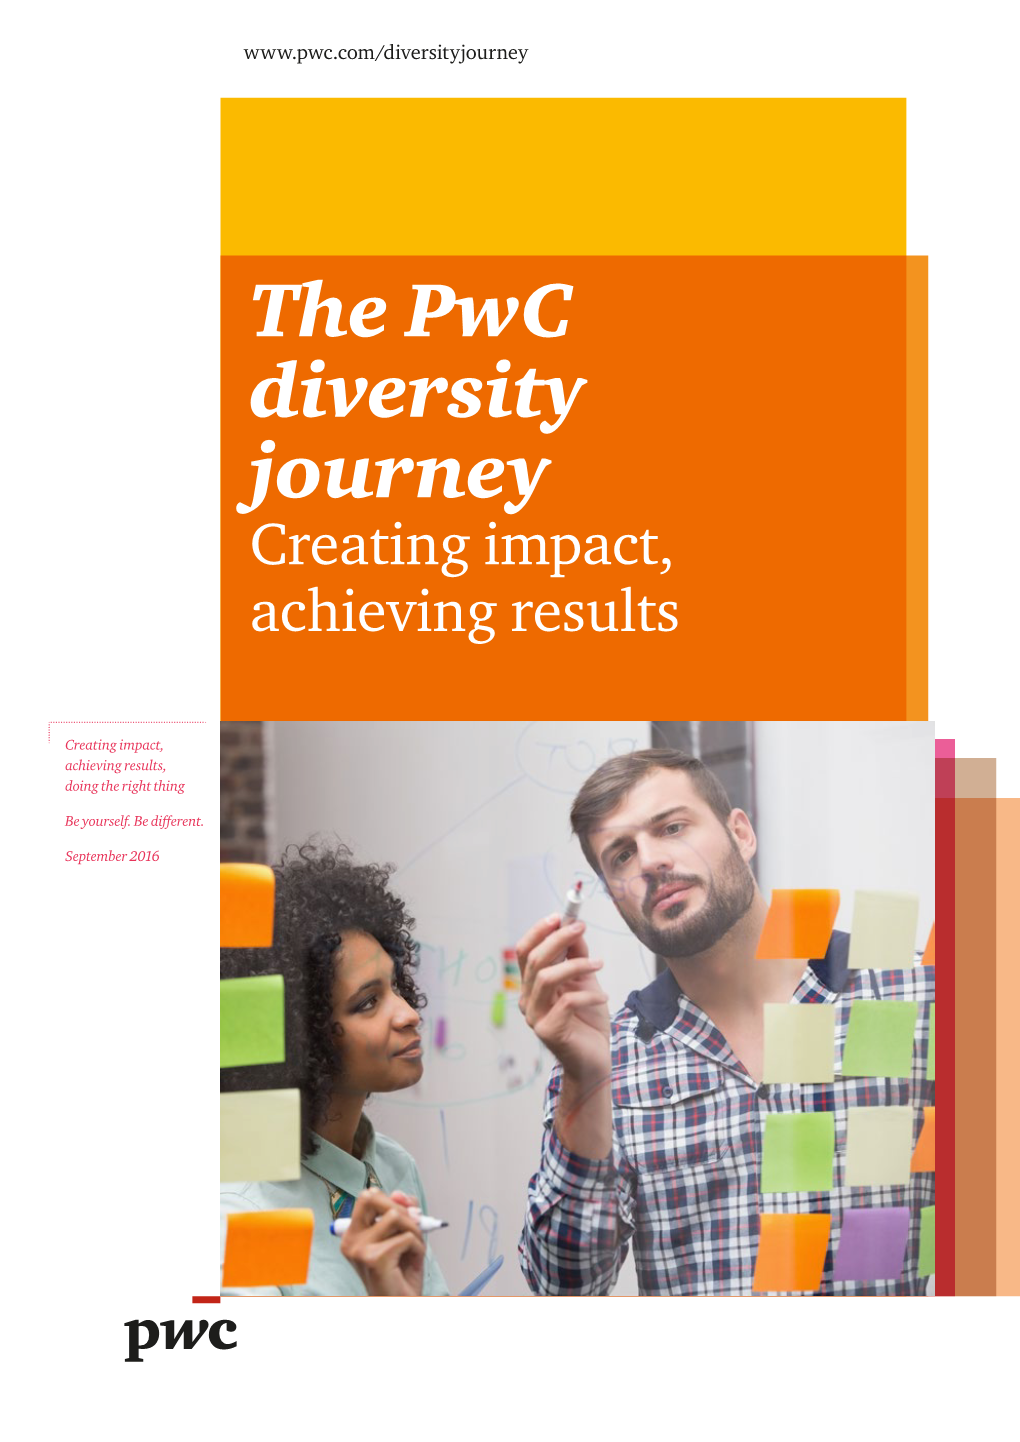 The Pwc Diversity Journey: Creating Impact, Achieving Results